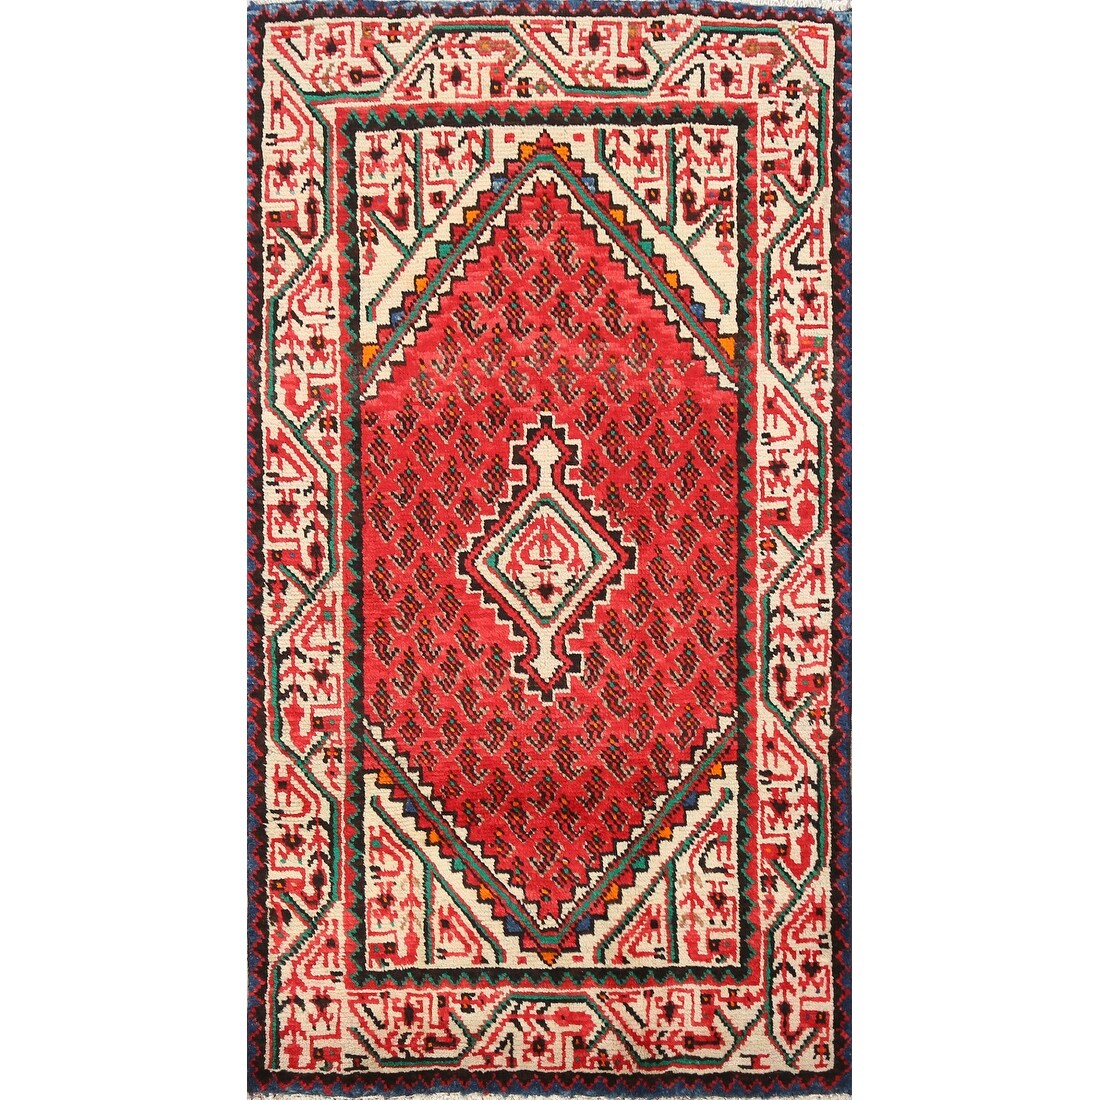 Geometric Boteh Botemir Persian Area Rug Hand-knotted Wool Carpet - 27 X 45